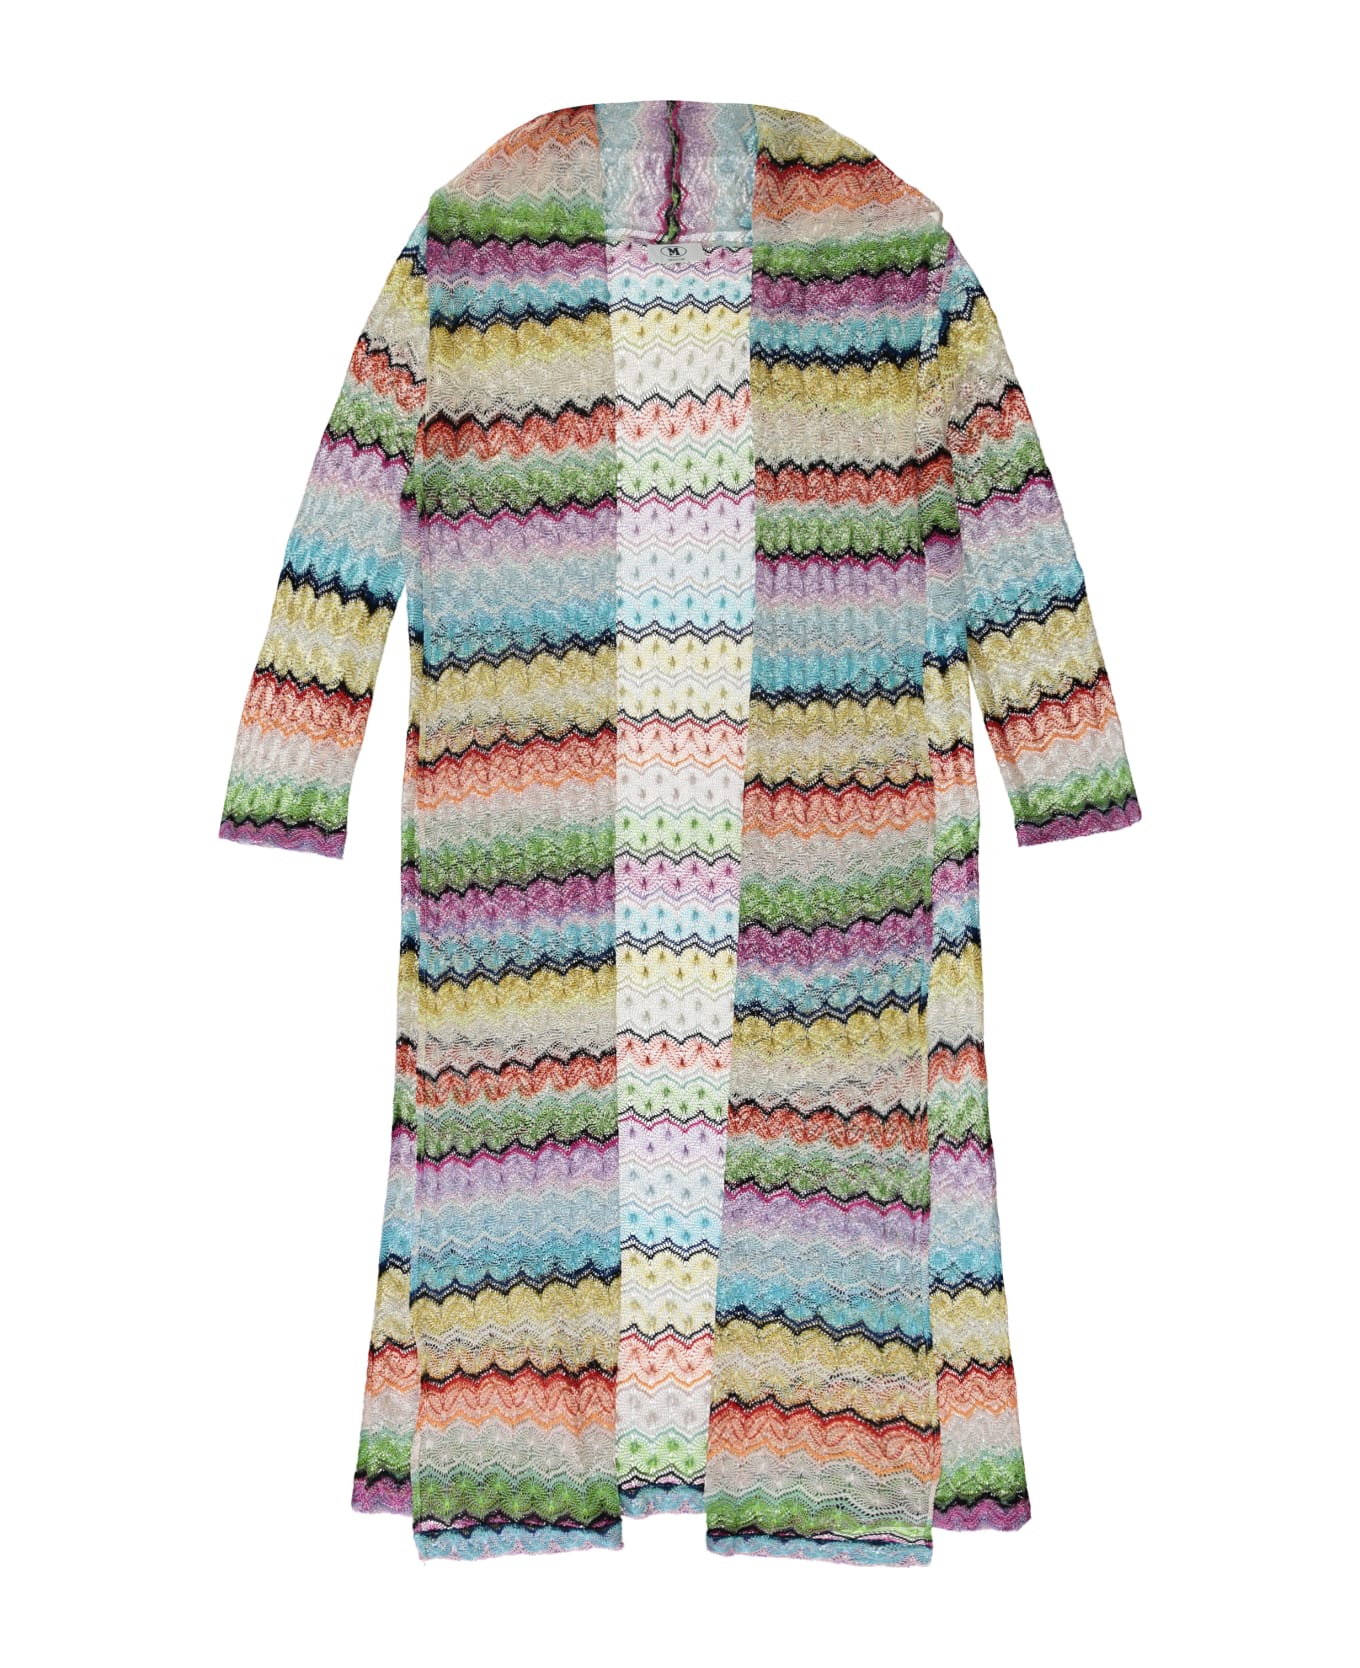 M Missoni Knitted Cover-up Dress - Multicolor